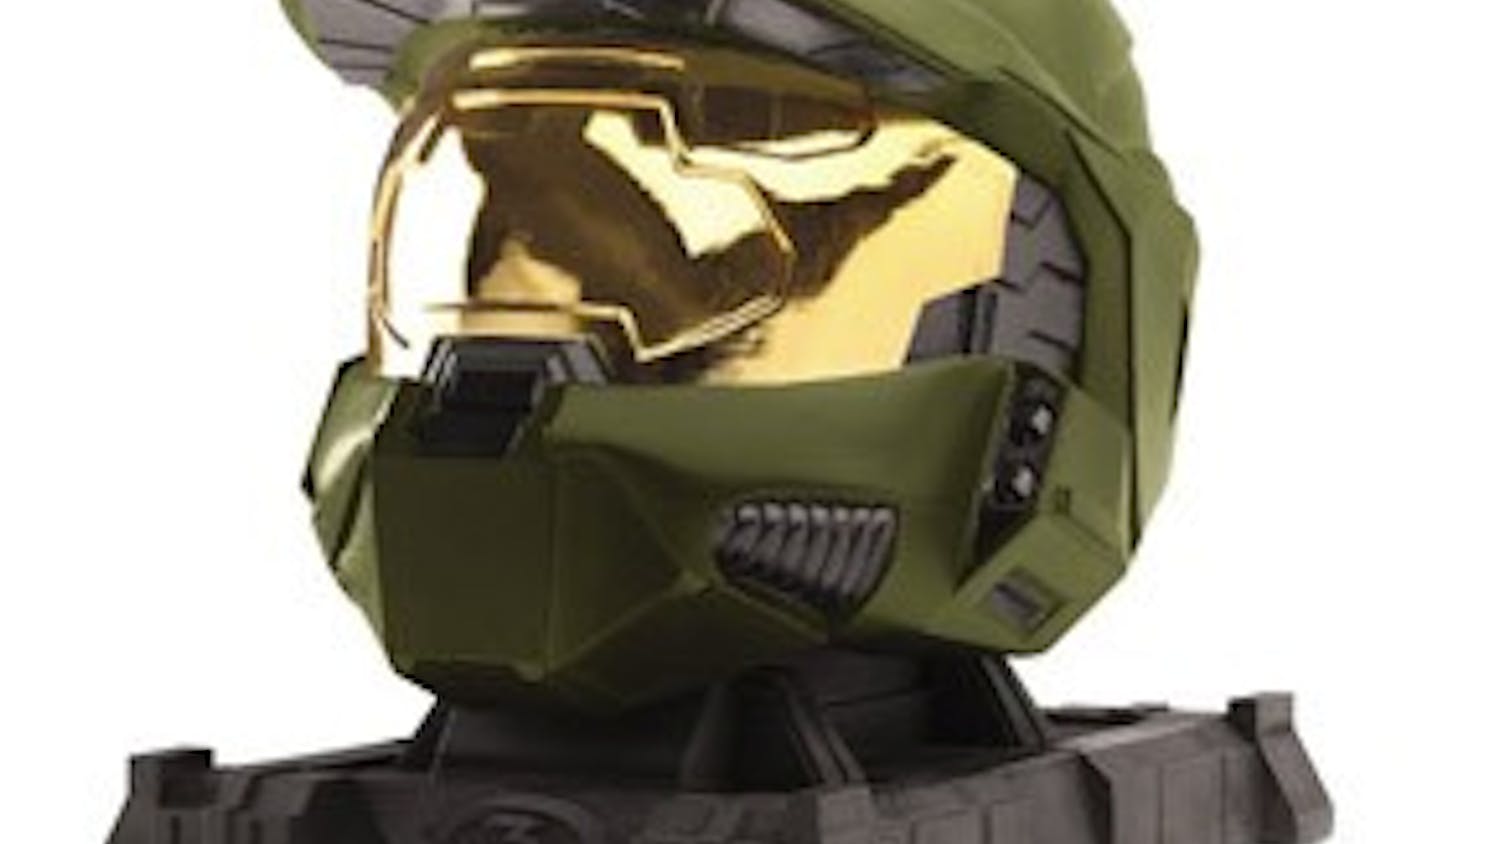 This Spartan helmet comes with the Legendary Edition of "Halo 3." Don't get too excited - the helmet is only made to sit on the stand, not for wearing while playing.